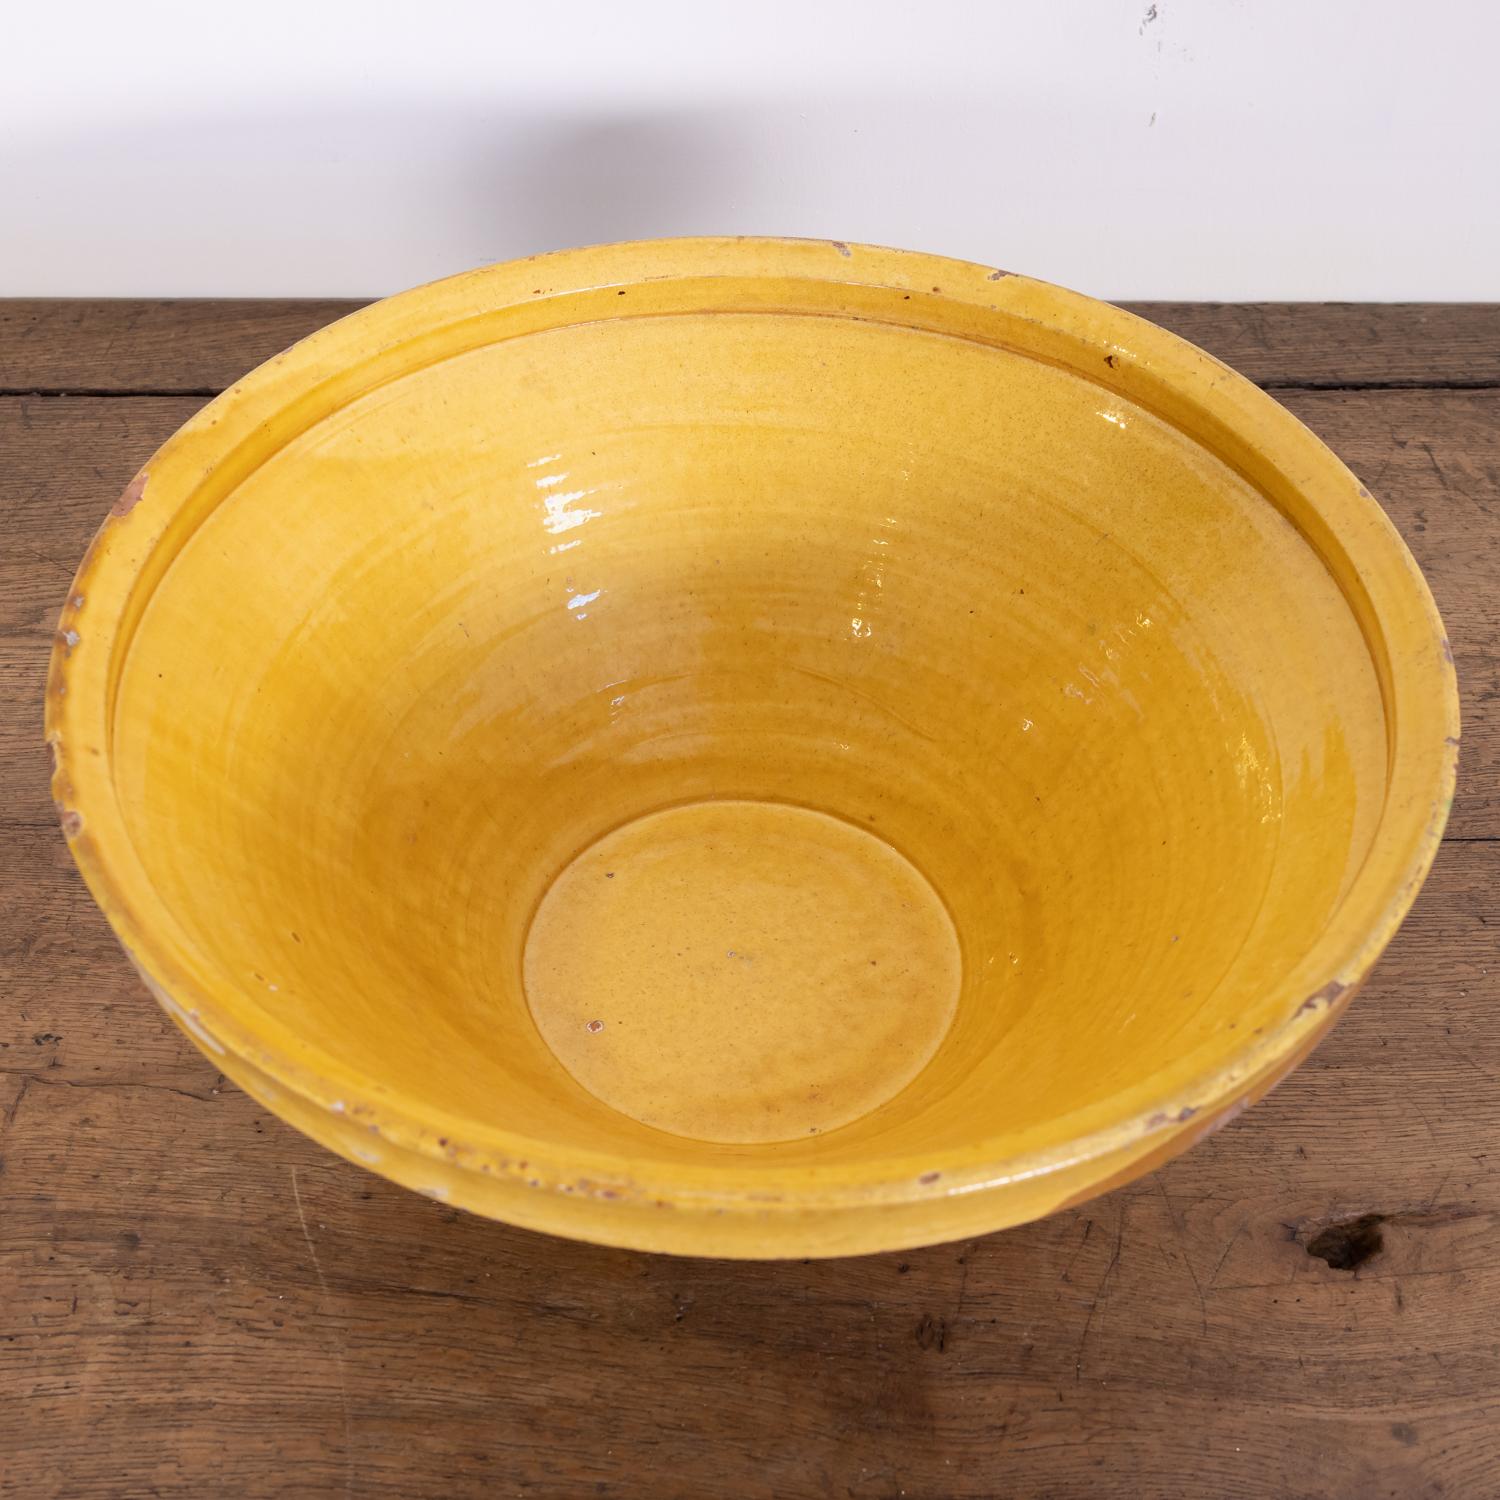 A 19th century French pancheon or dough bowl having an unglazed pale terracotta exterior and a beautiful bright yellow glaze to the interior and lip, circa 1880s. Pancheons were multipurpose terracotta kitchen bowls used during the 17th, 18th, and